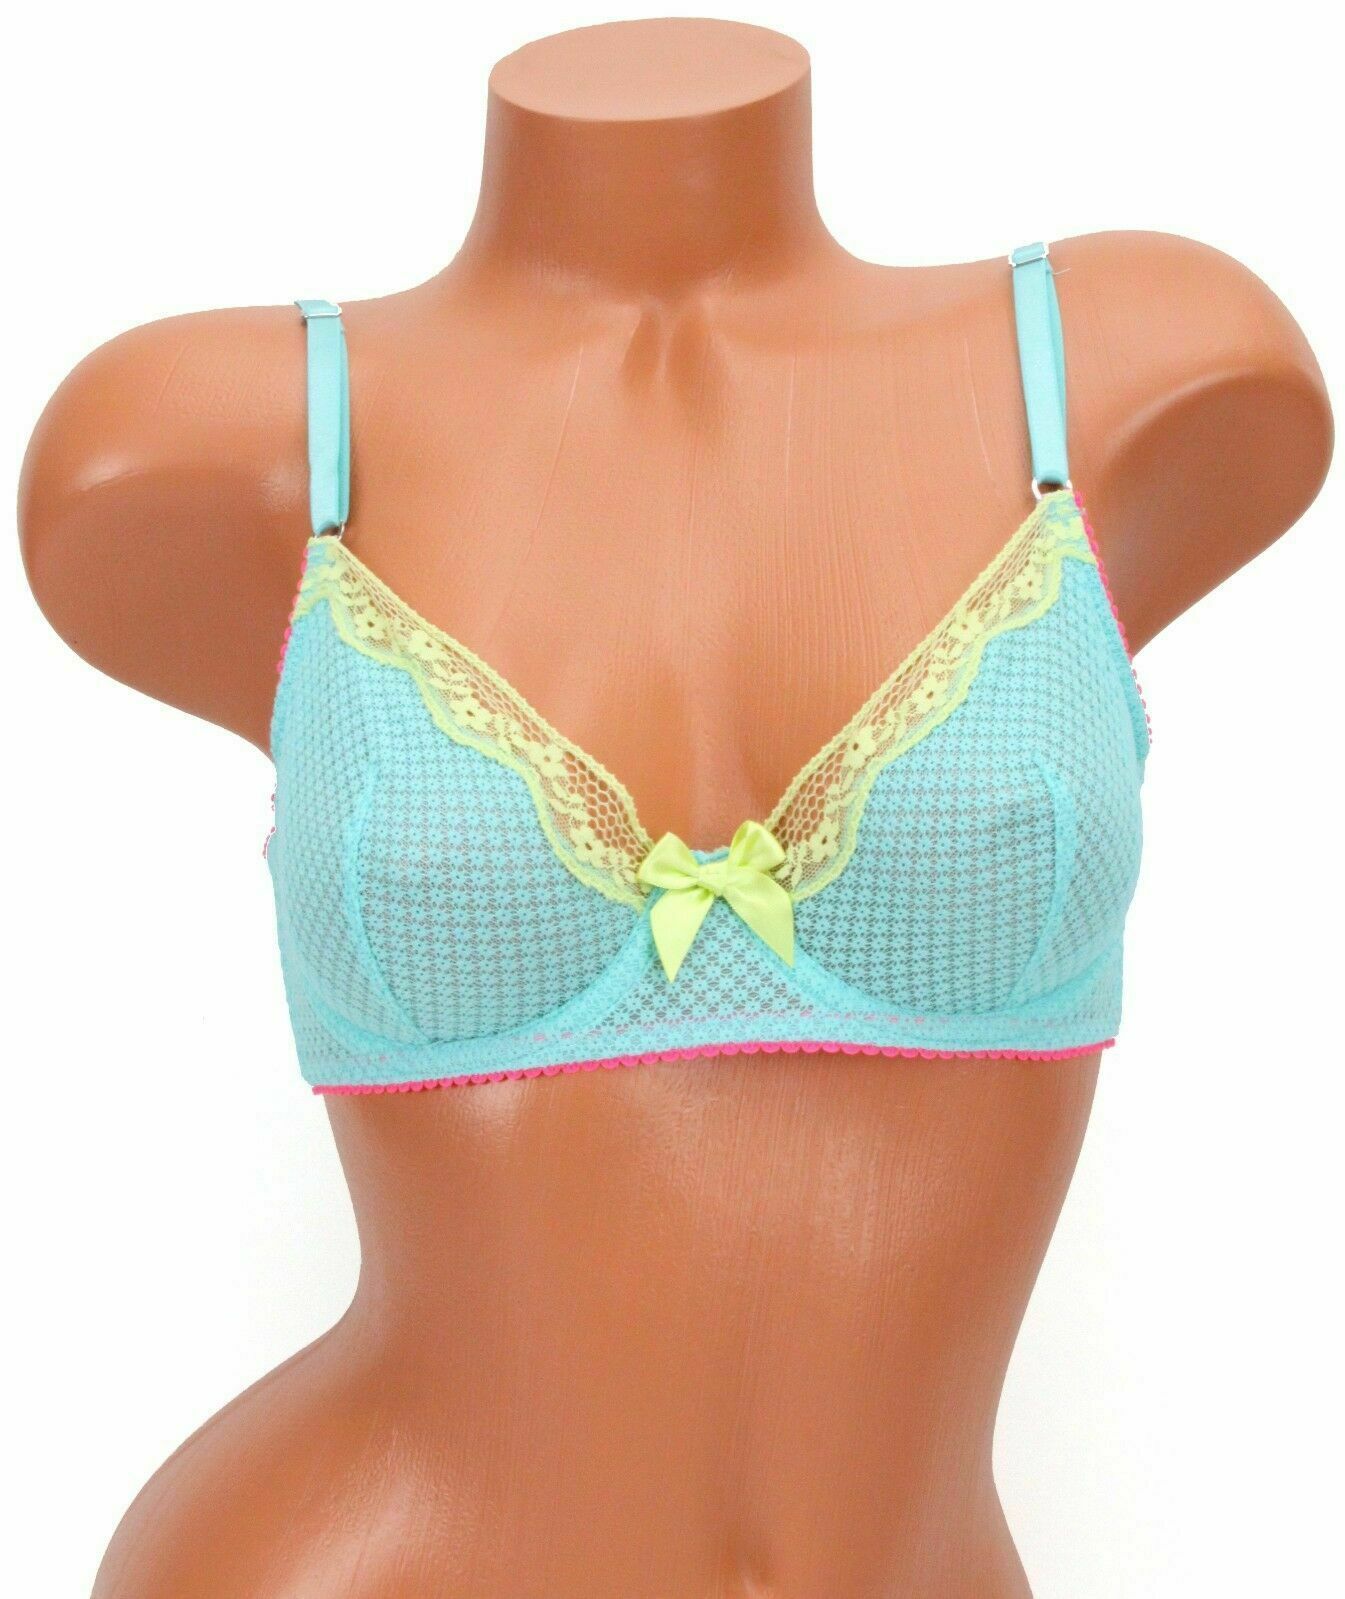 Victorias Secret Very Sexy Unlined Demi Bra Blue With Neon Lace Size 32a Nwt Bras And Bra Sets 